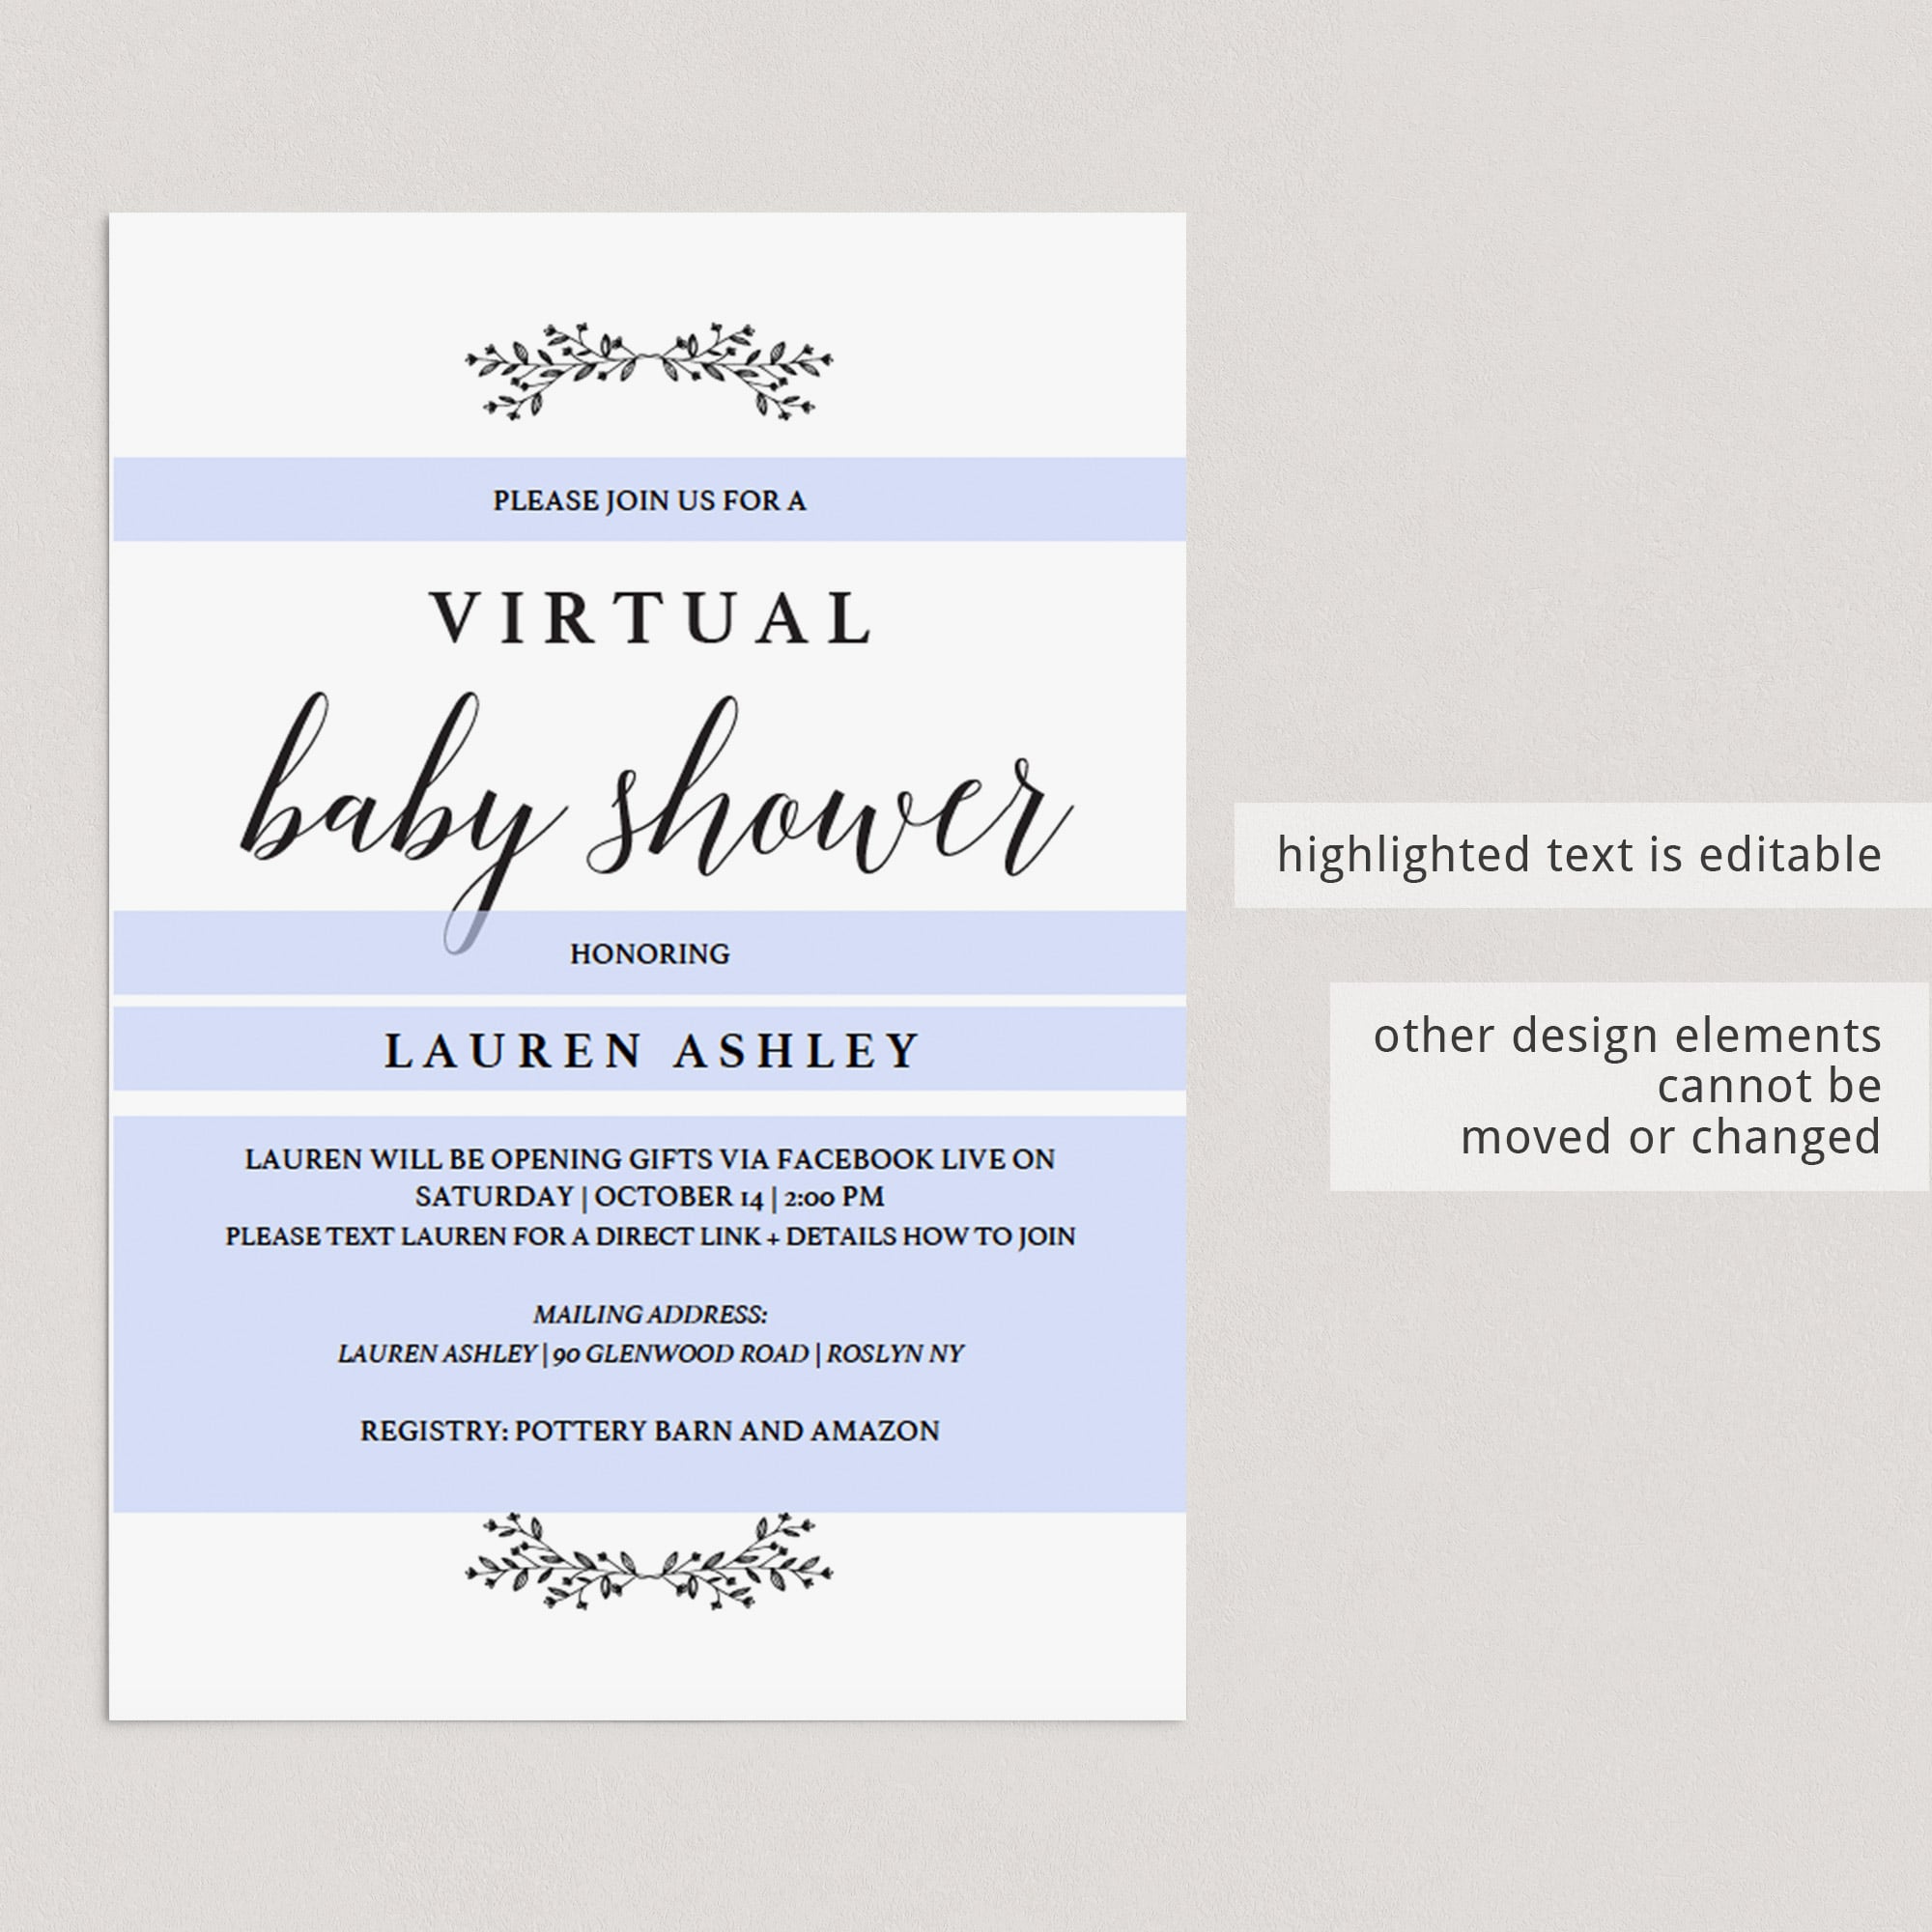 Rustic virtual baby shower invitation template by LittleSizzle